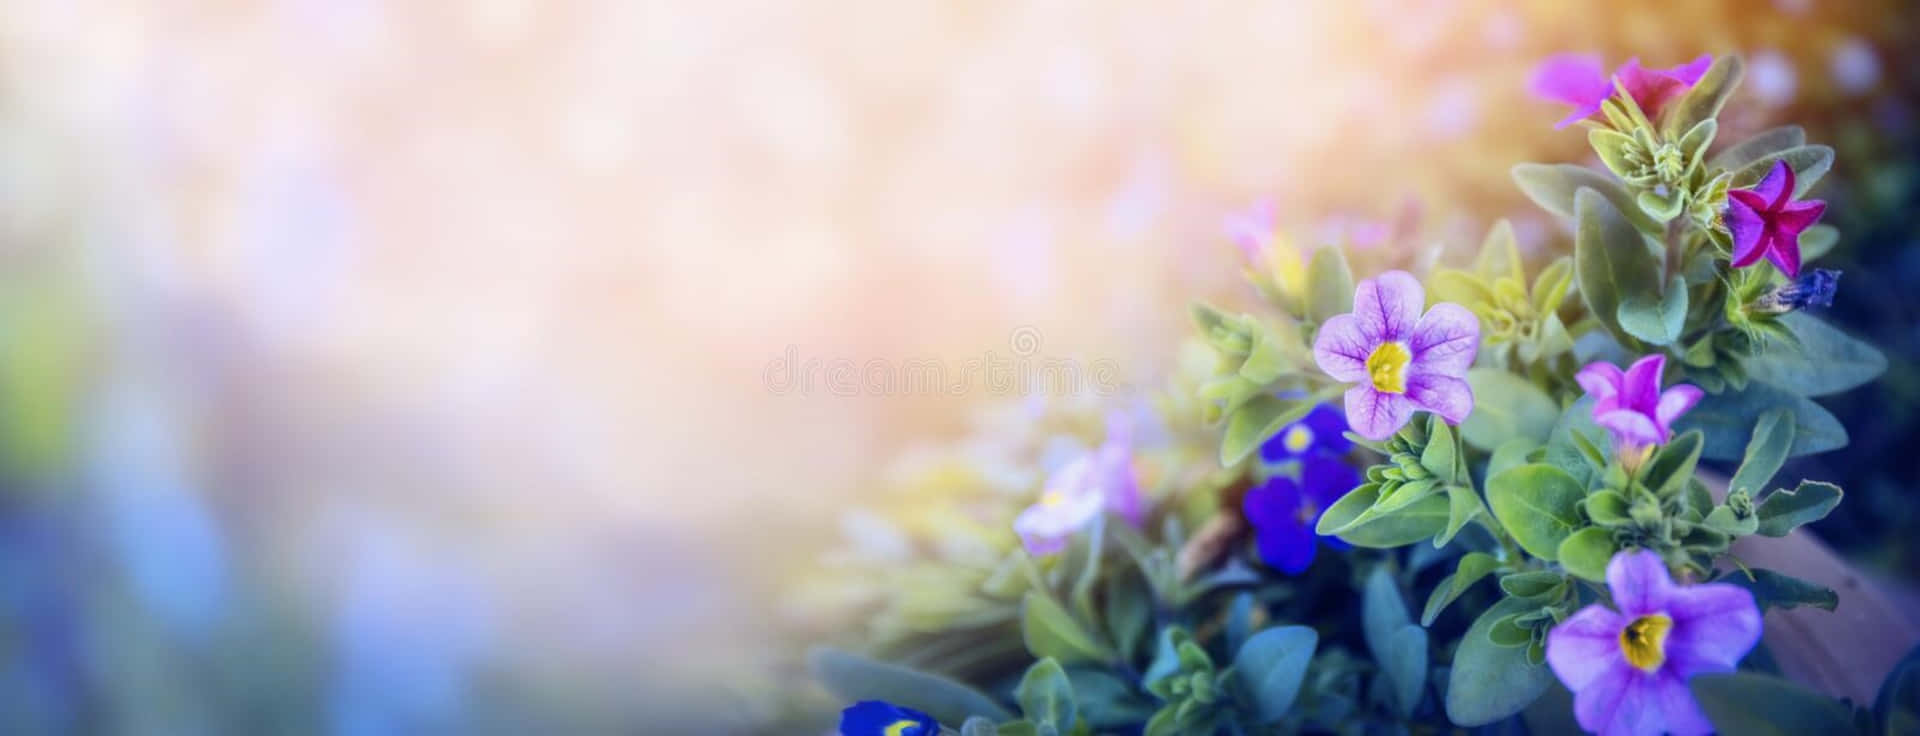 Flowers In The Garden With Blurred Background Stock Photos